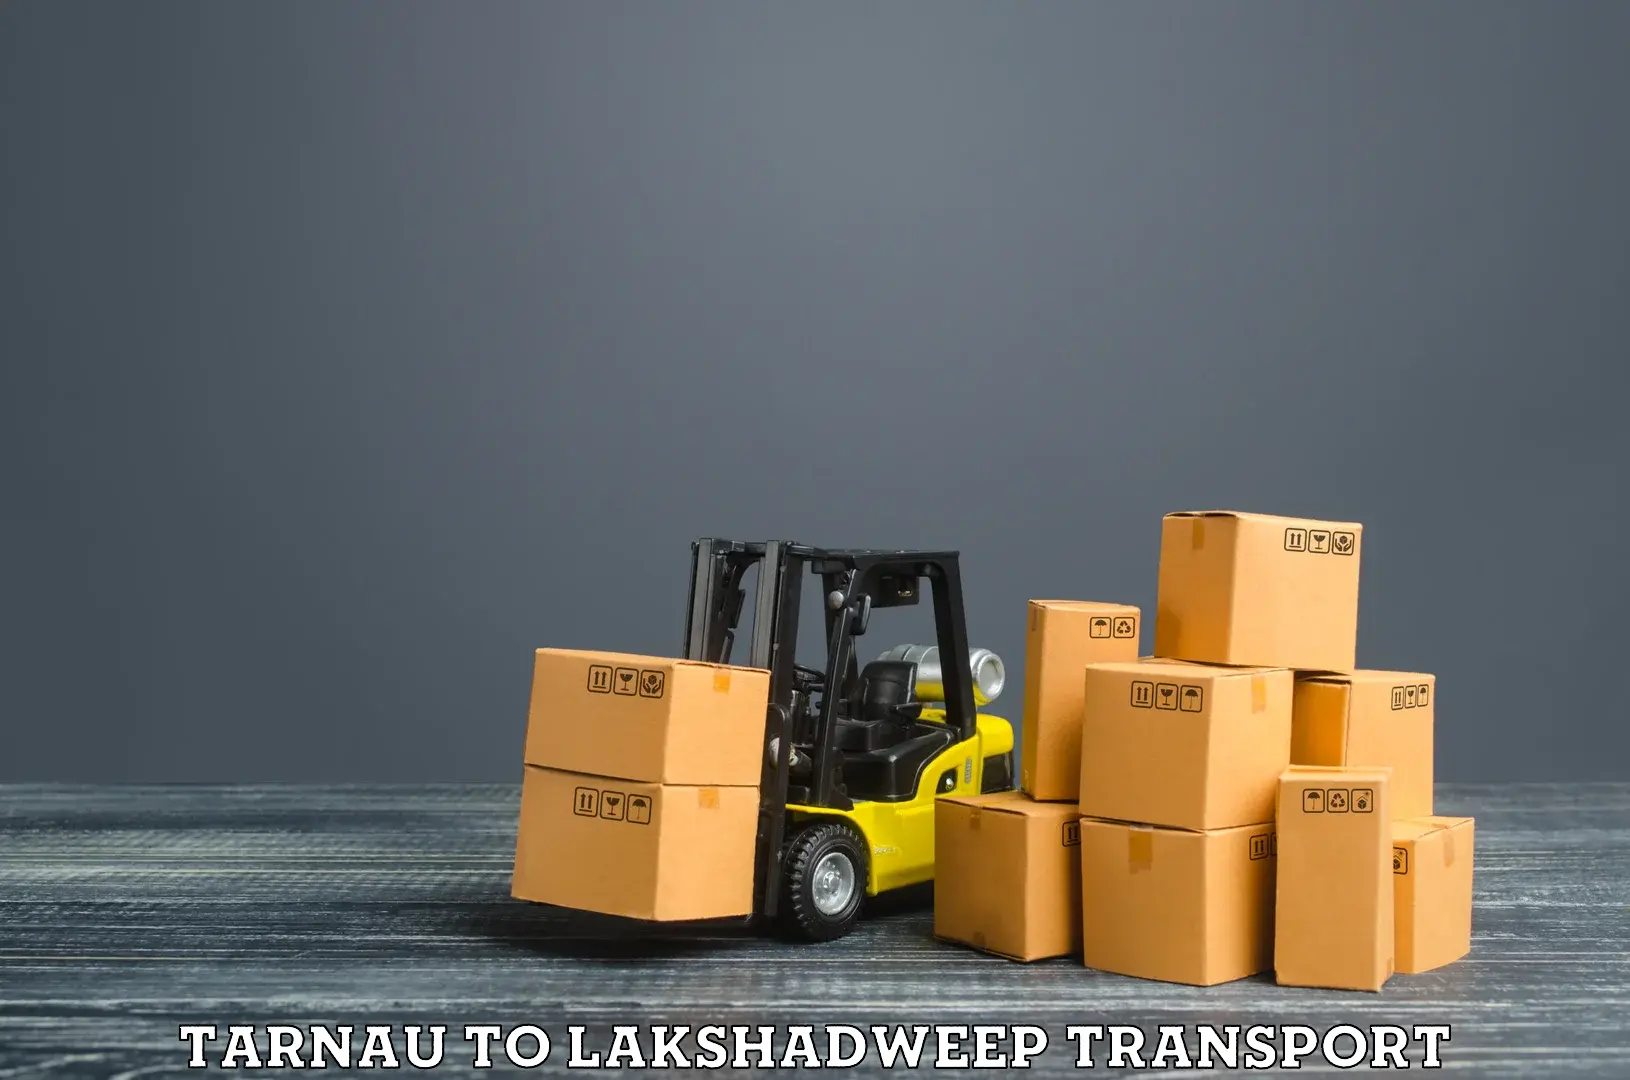 Transport bike from one state to another Tarnau to Lakshadweep